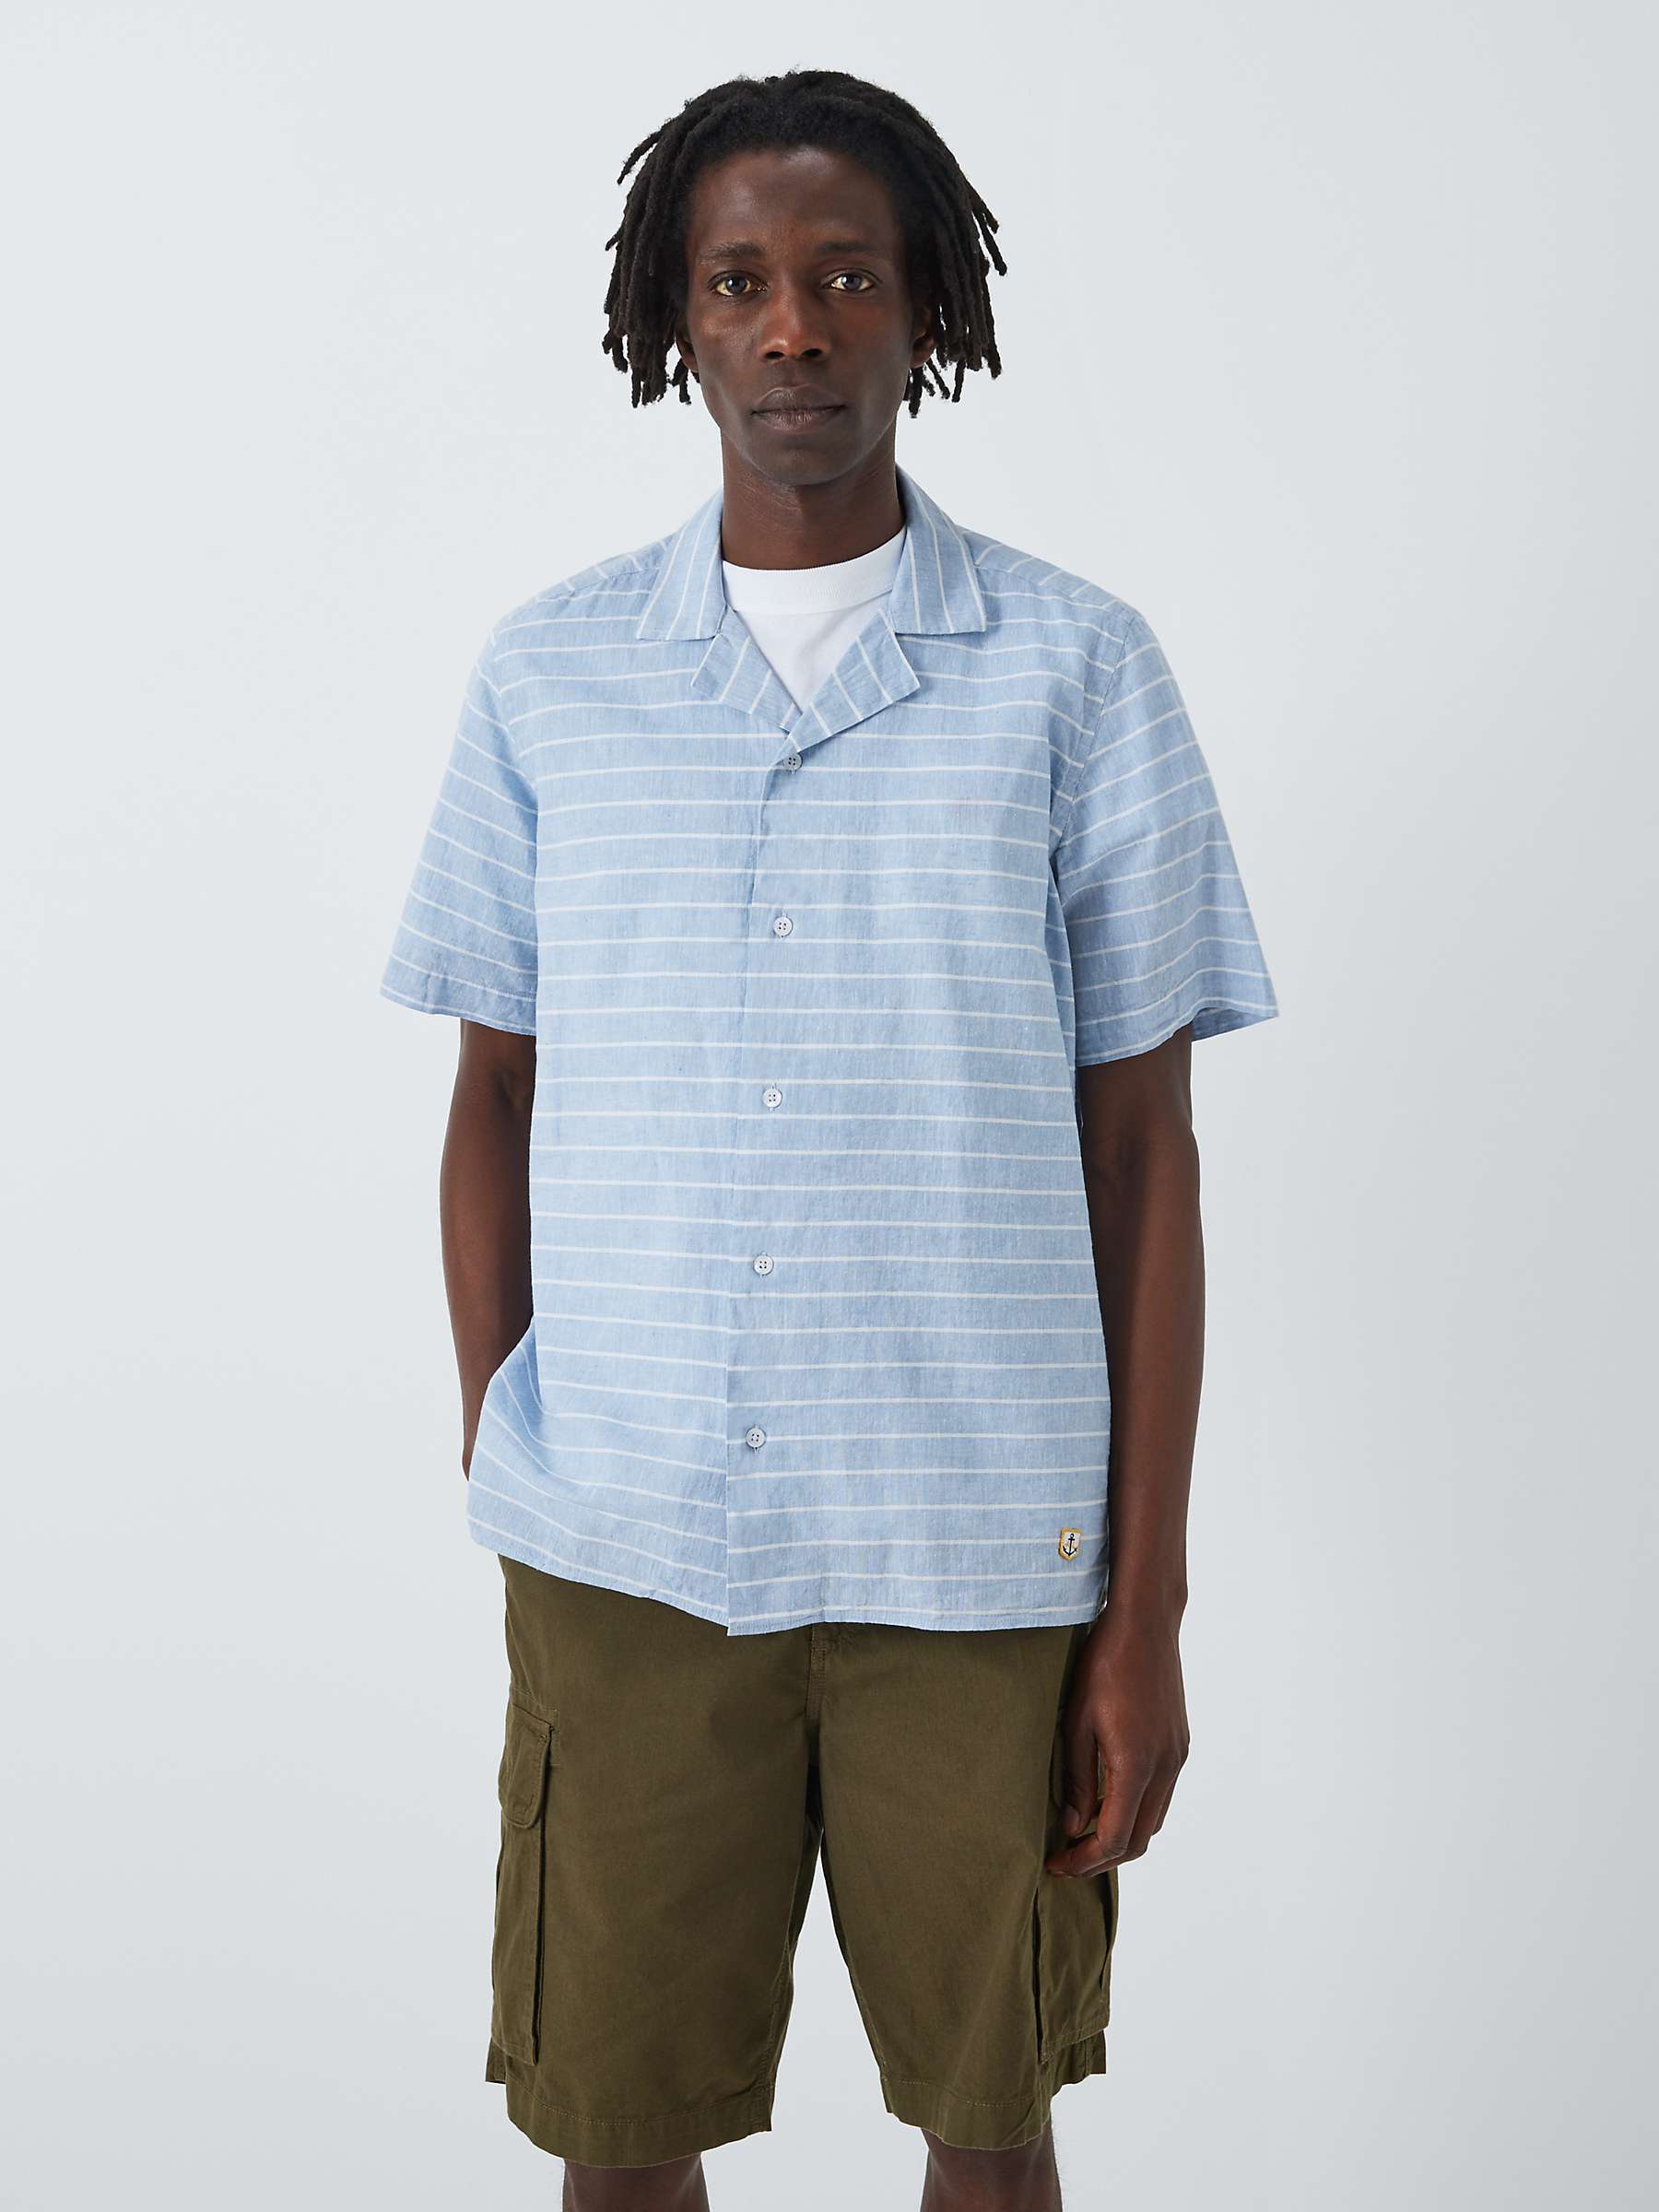 Buy Armor Lux Chemise Striped Short Sleeve Shirt, Blue Online at johnlewis.com